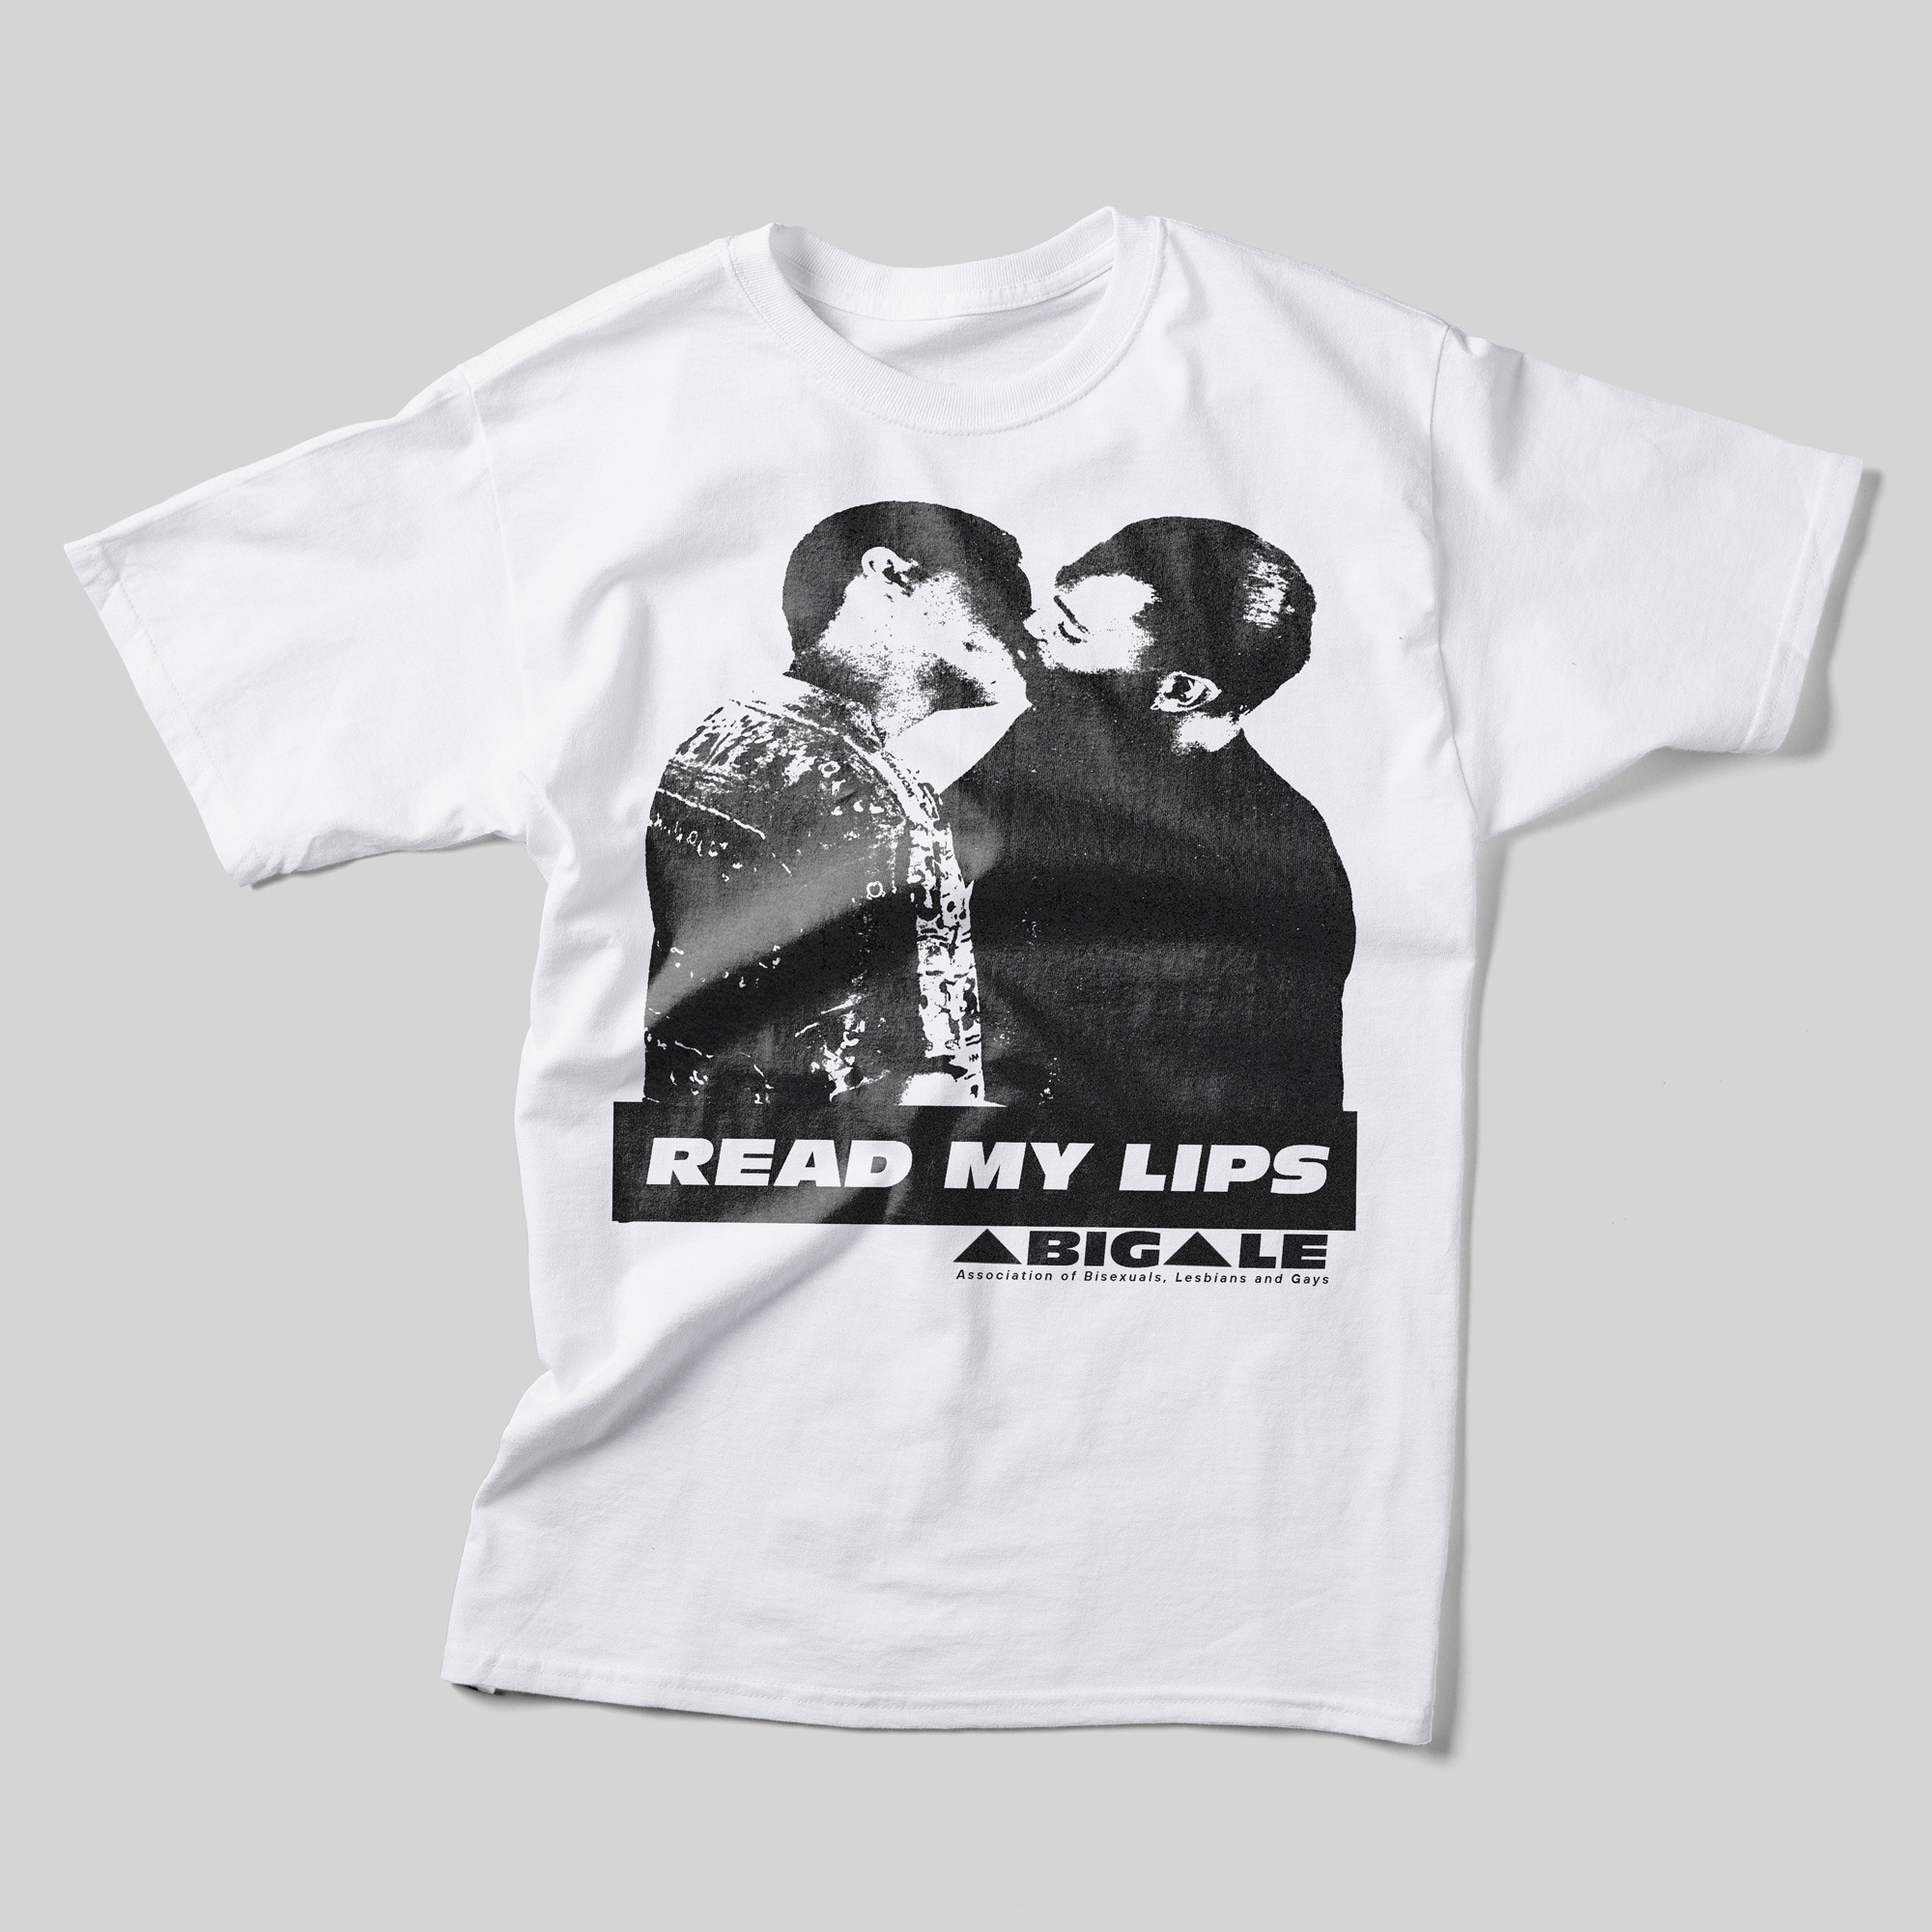 A white t-shirt with a photo of two men kissing in black and white. Beneath the photo, it reads "Read My Lips" and the logo for "ABIGALE: Association of Bisexuals, Lesbians, and Gays."